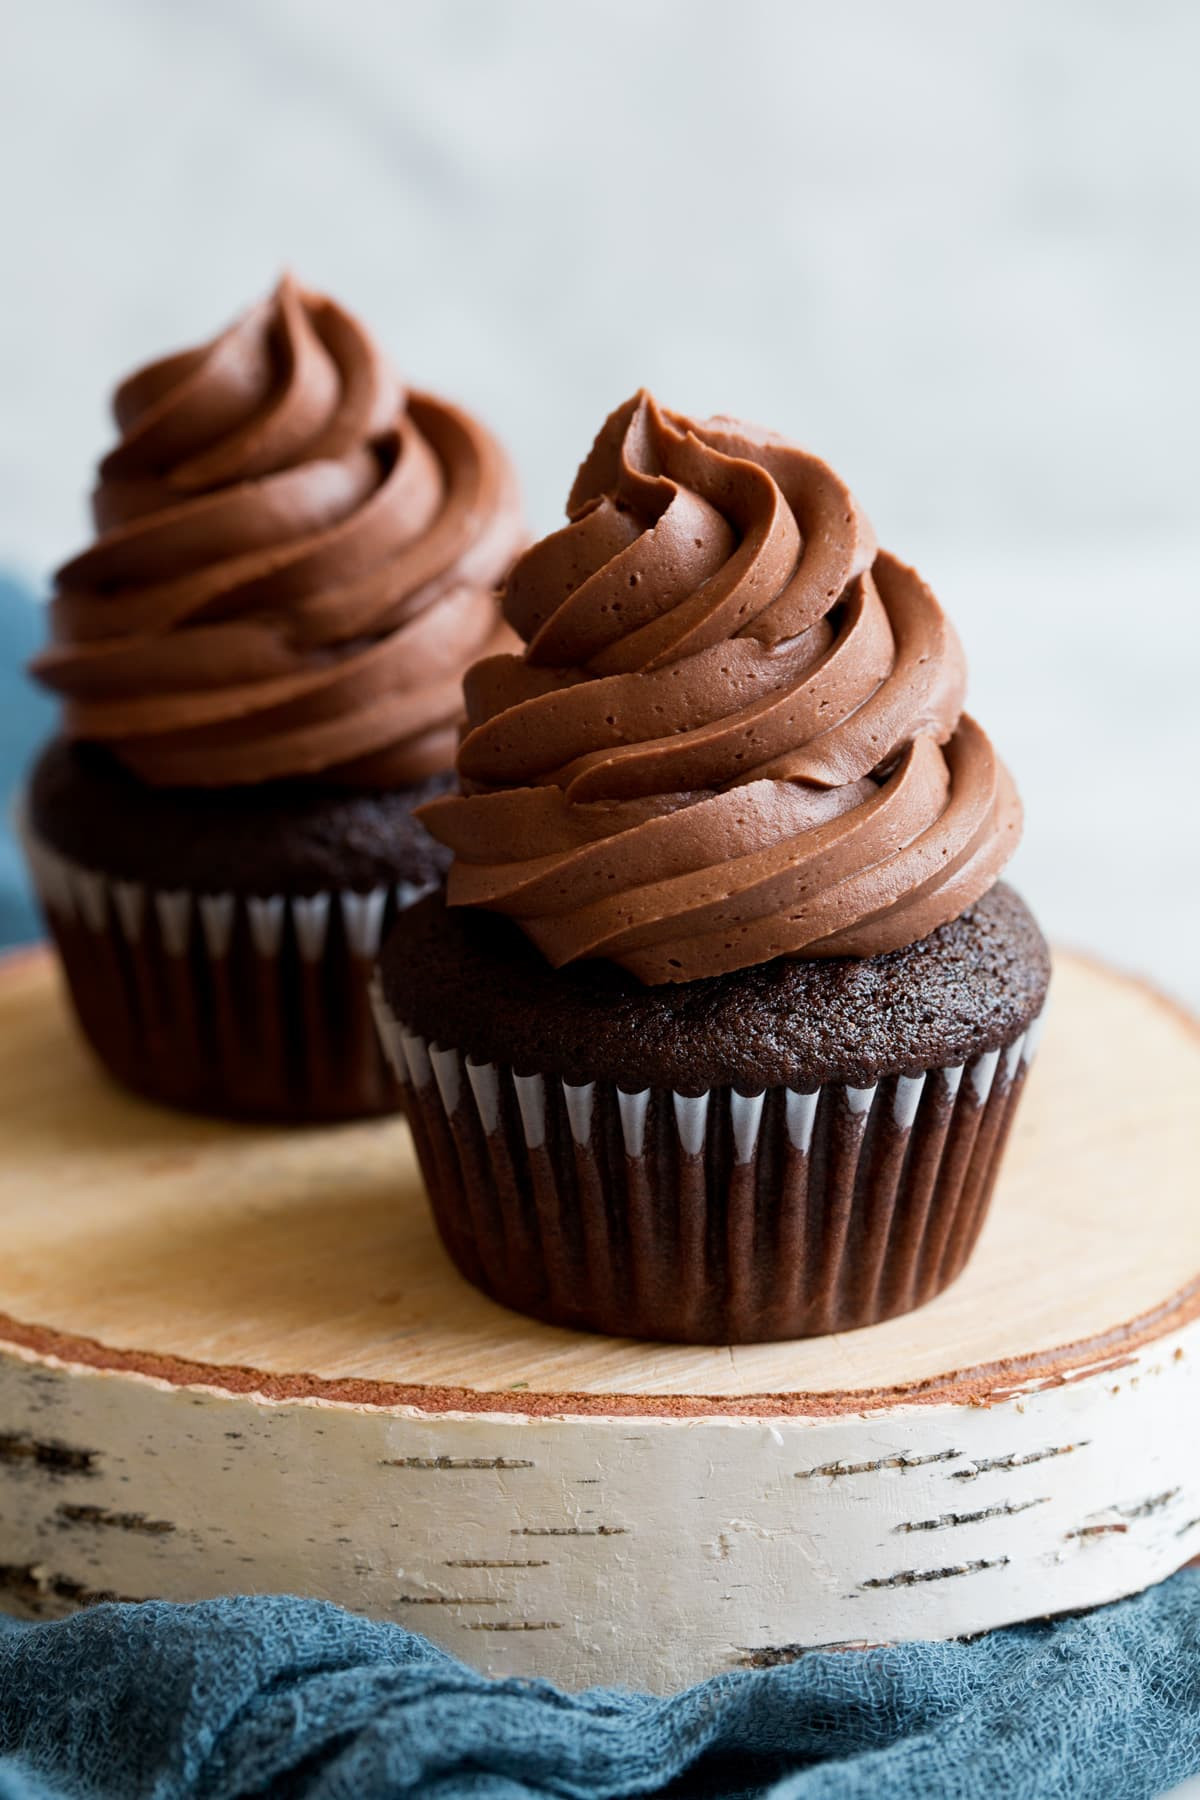 Chocolate Frosting Recipes
 The BEST Chocolate Buttercream Frosting Recipe Cooking